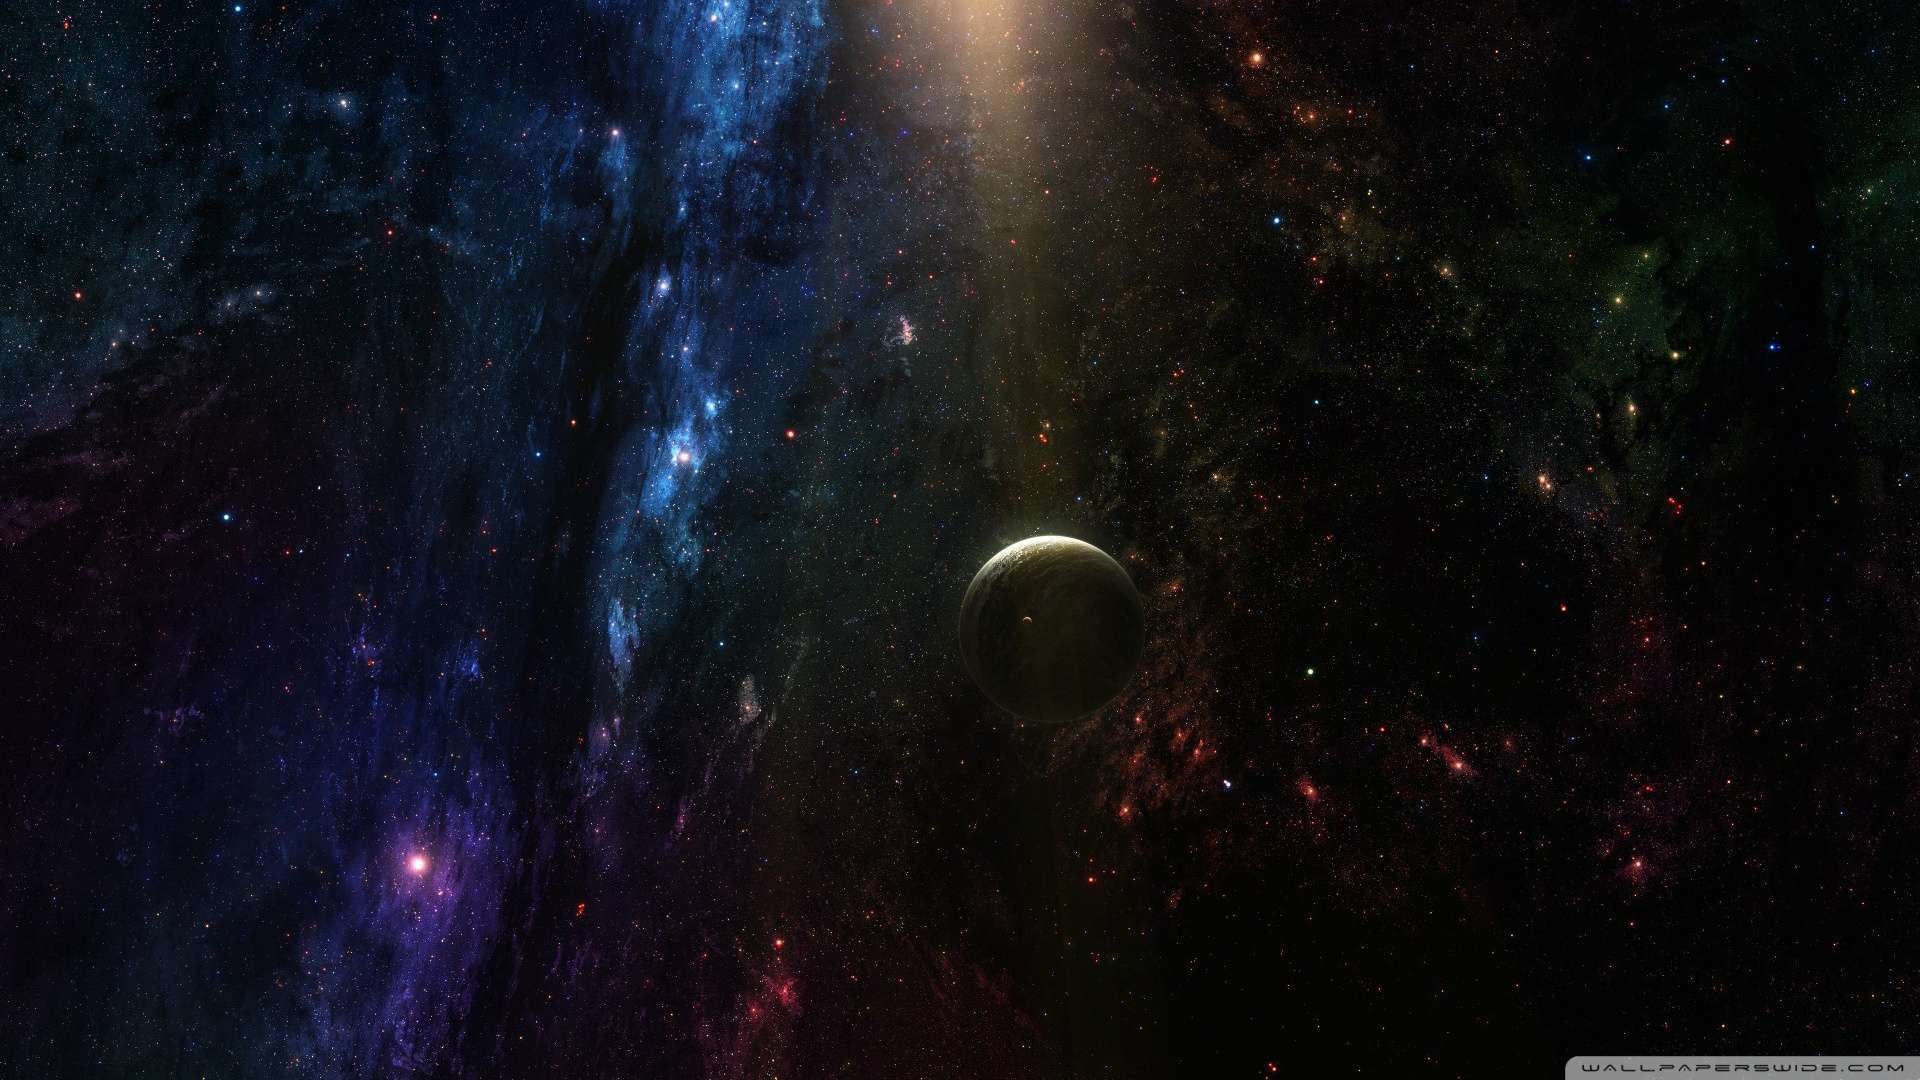 1920x1080 Wallpaper: Planet In Deep Space Wallpaper 1080p HD. Upload at February .